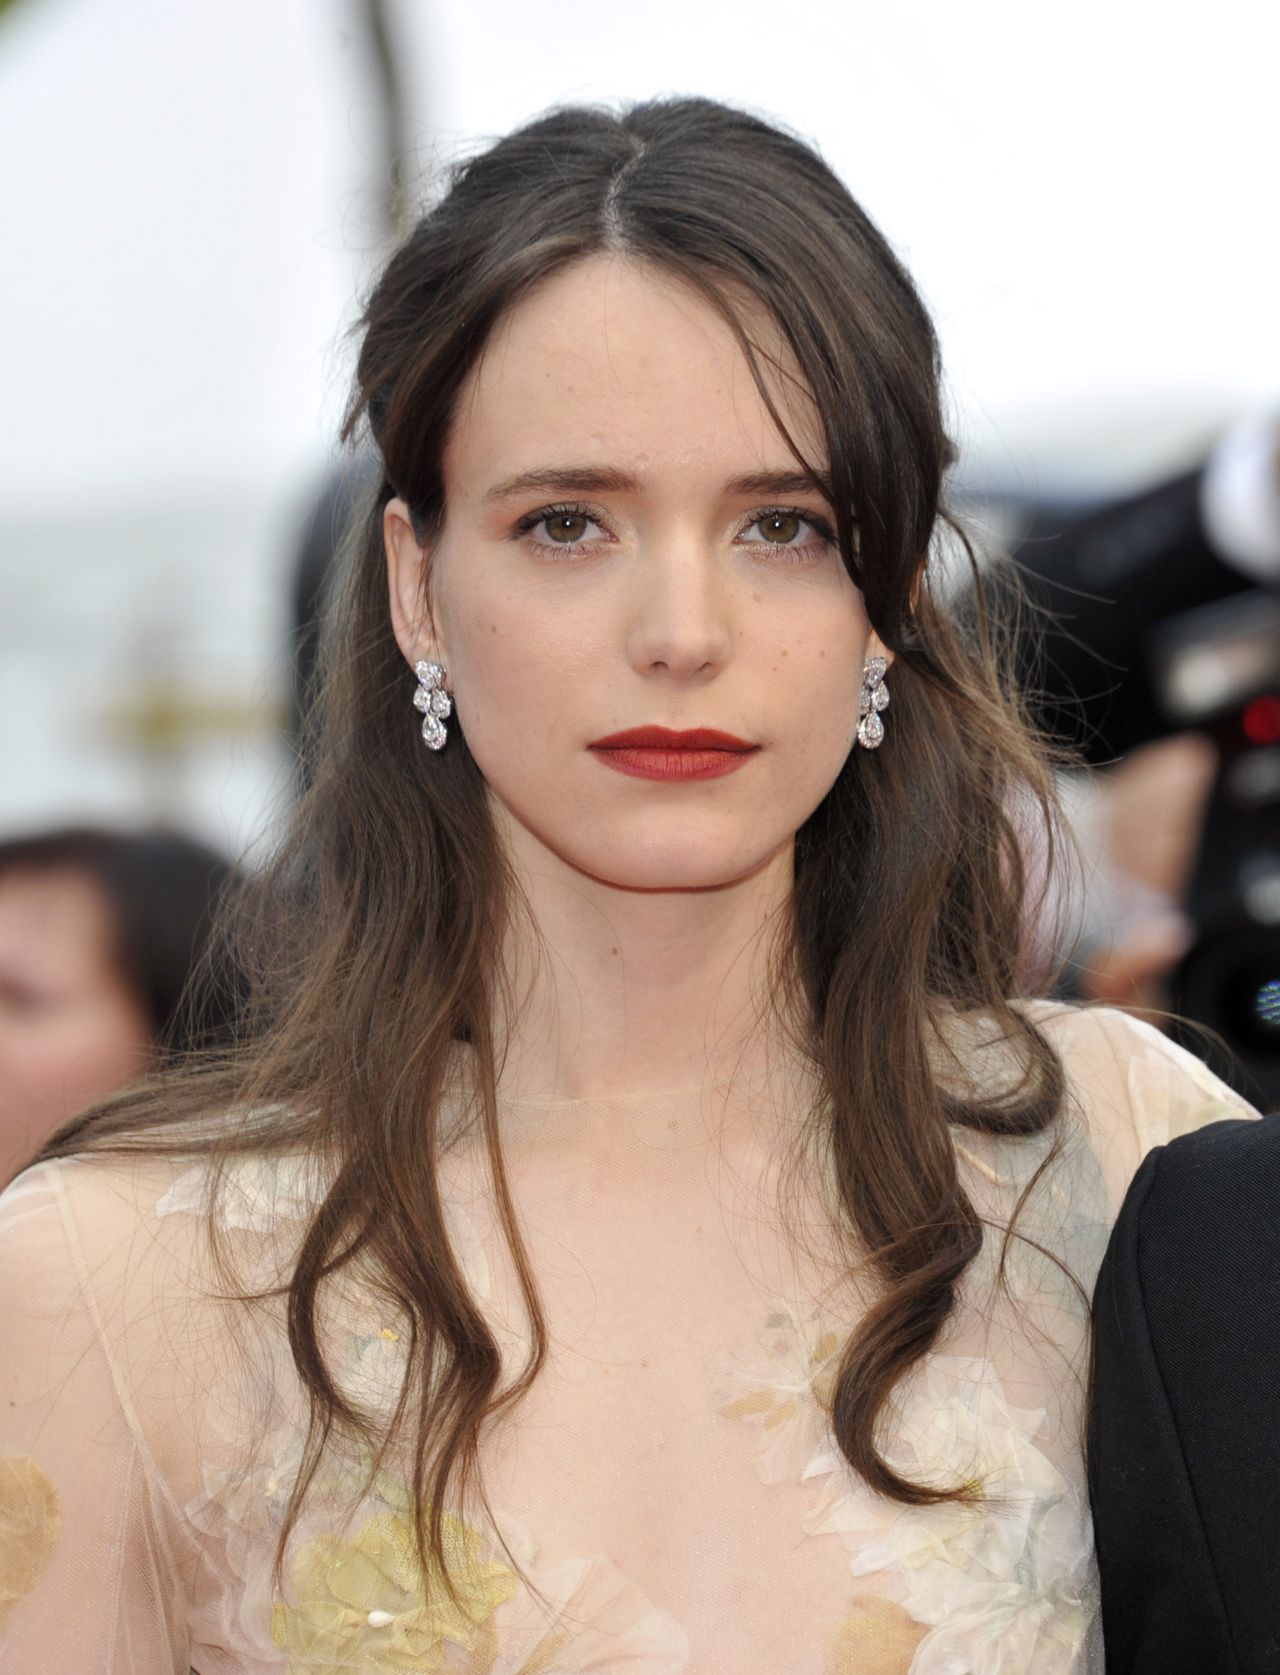 How tall is Stacy Martin?